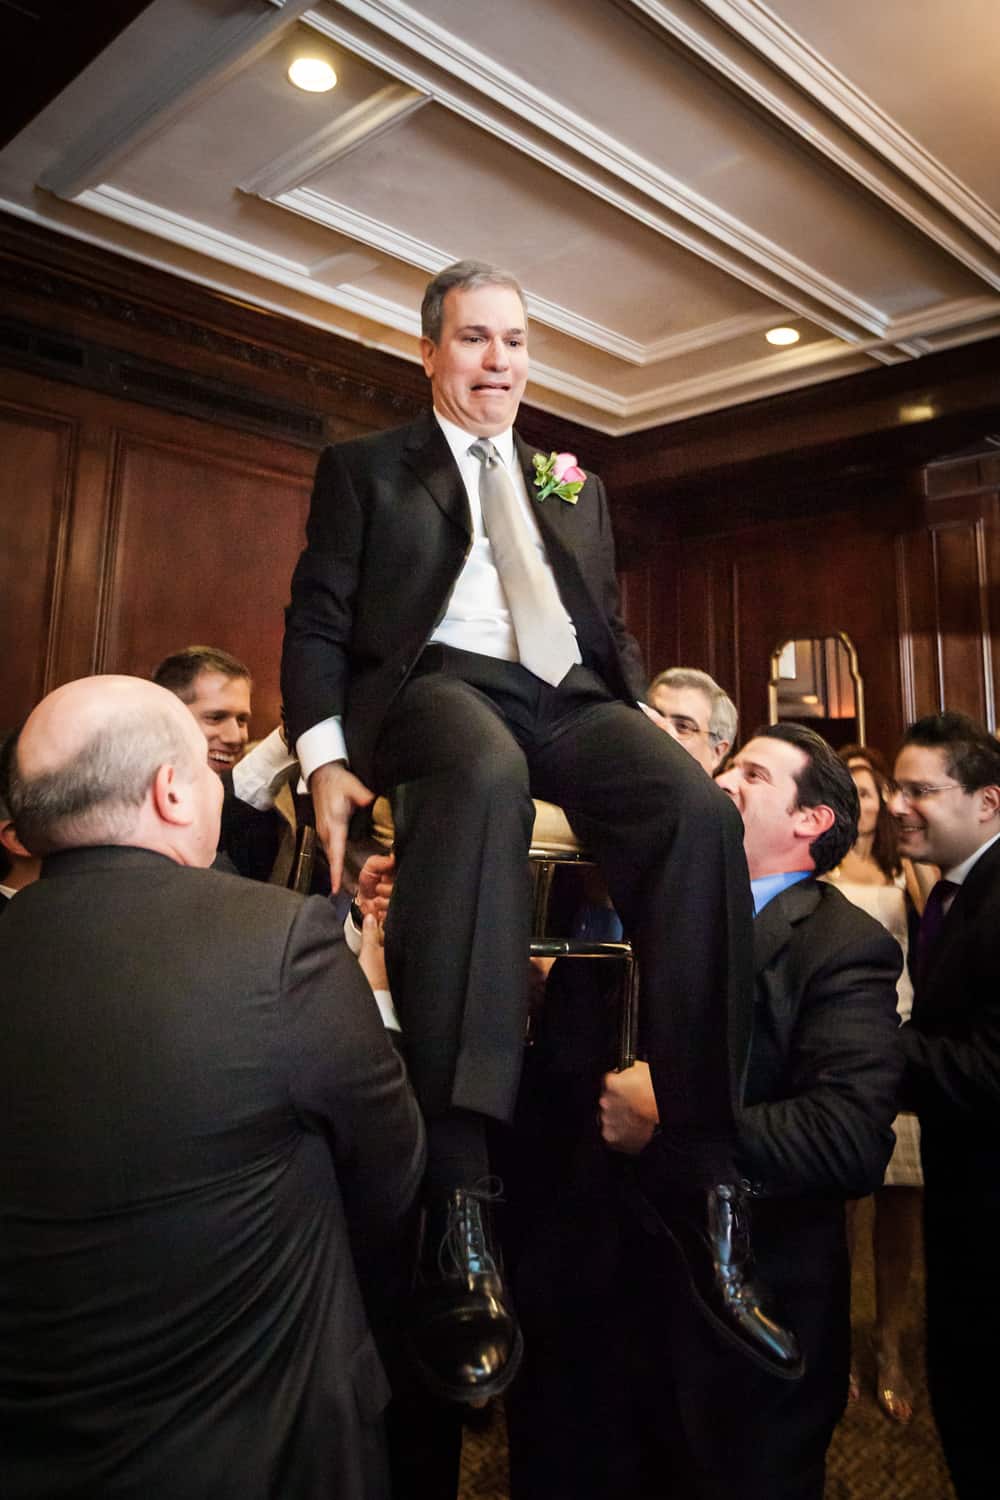 Groom lifted up on chair during hora dance at Harvard Club wedding